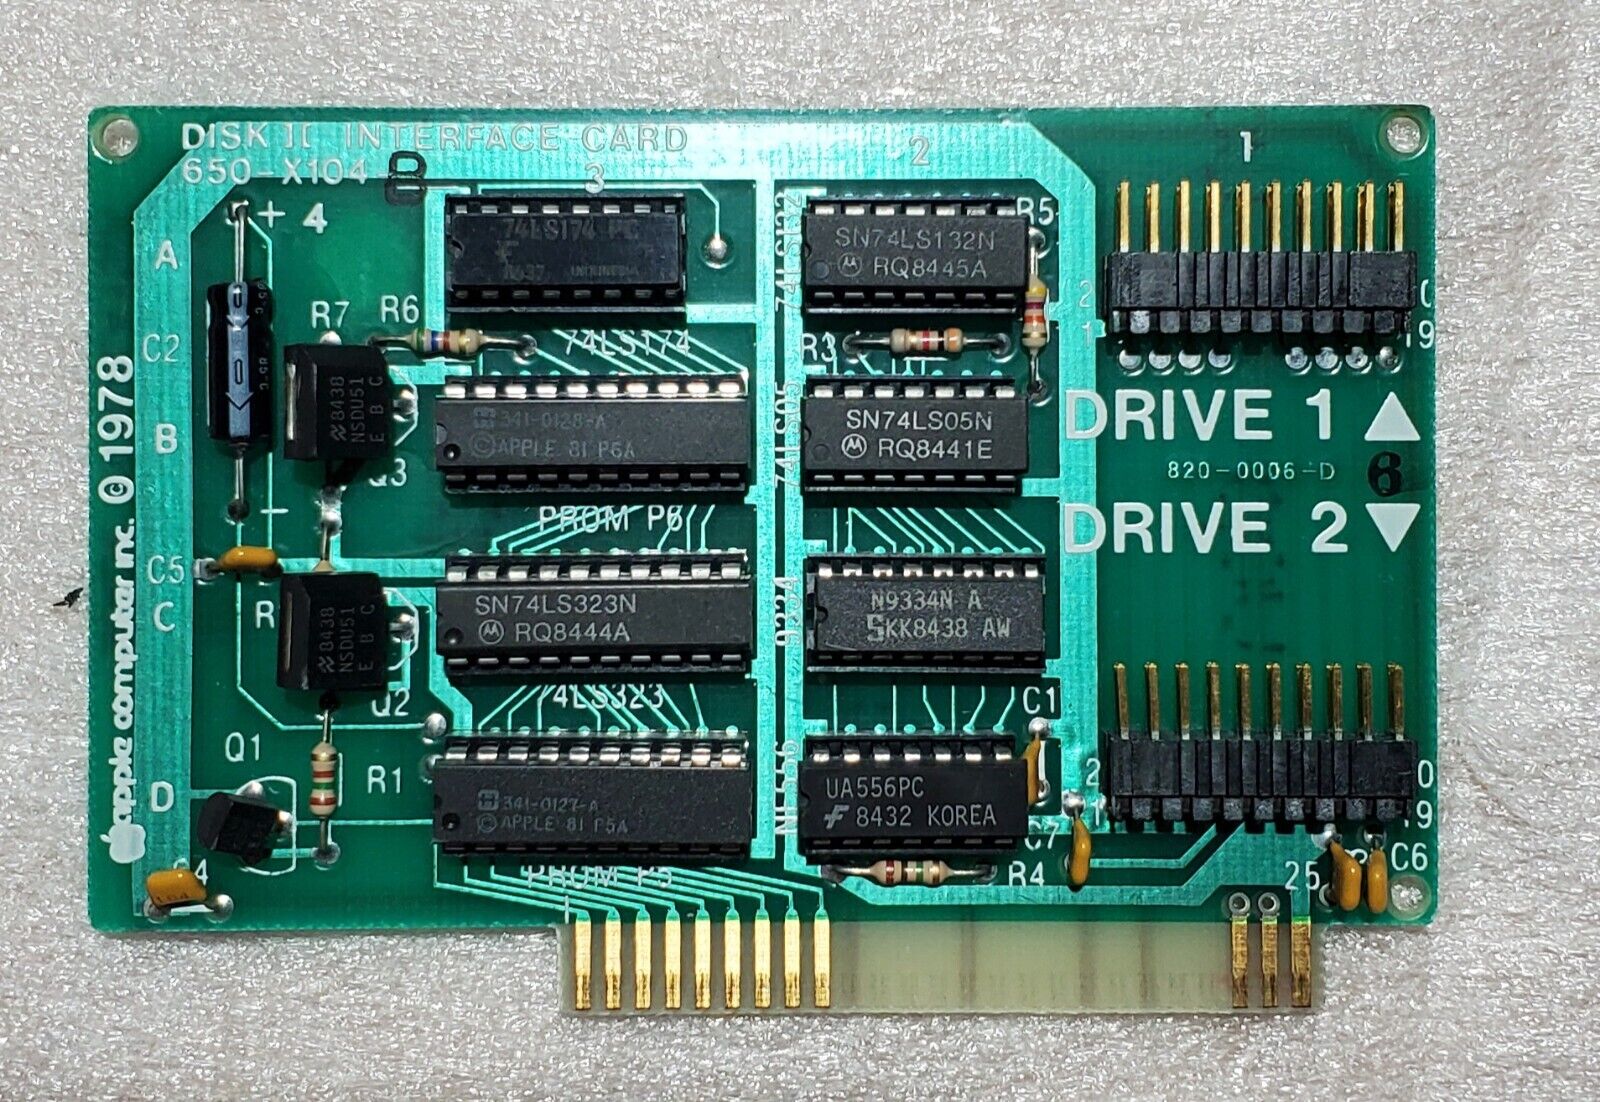 Apple II Plus Disk Interface Card Floppy Drive Controller 650-X104 